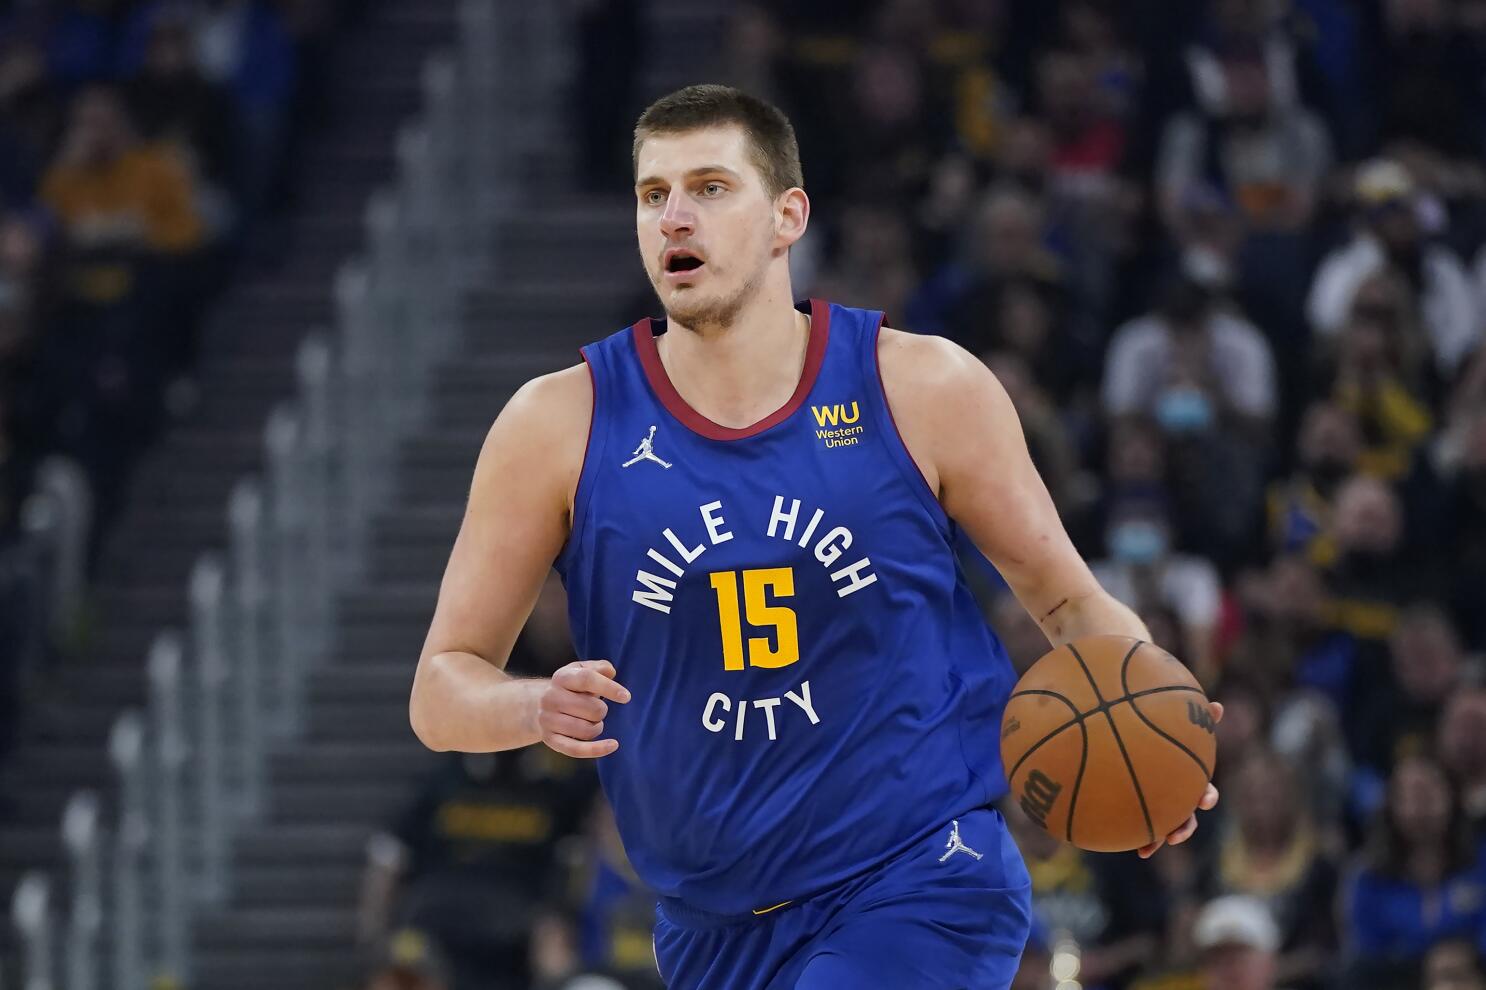 The Numbers Crunch: Jokic dominates Nuggets win at Washington